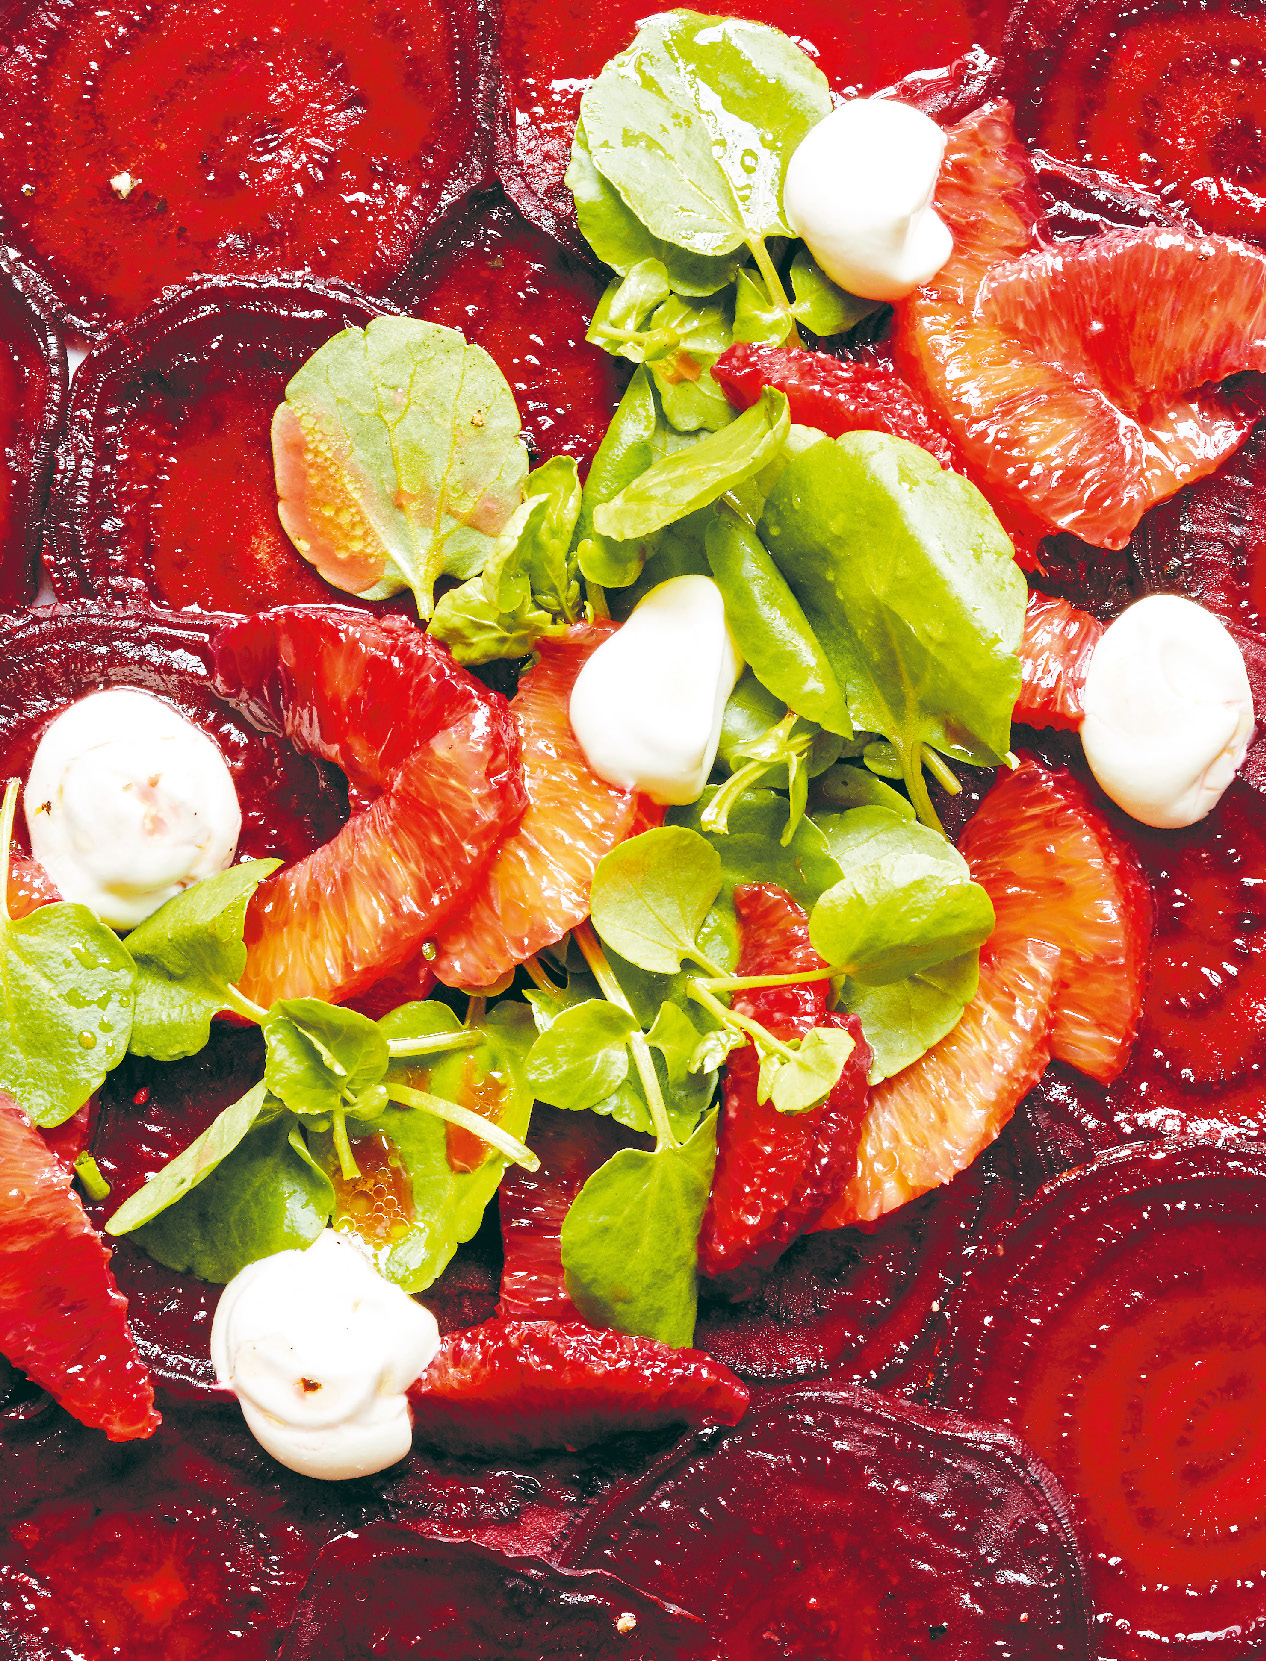 Roasted beetroot carpaccio with goat's curd and blood orange dressing